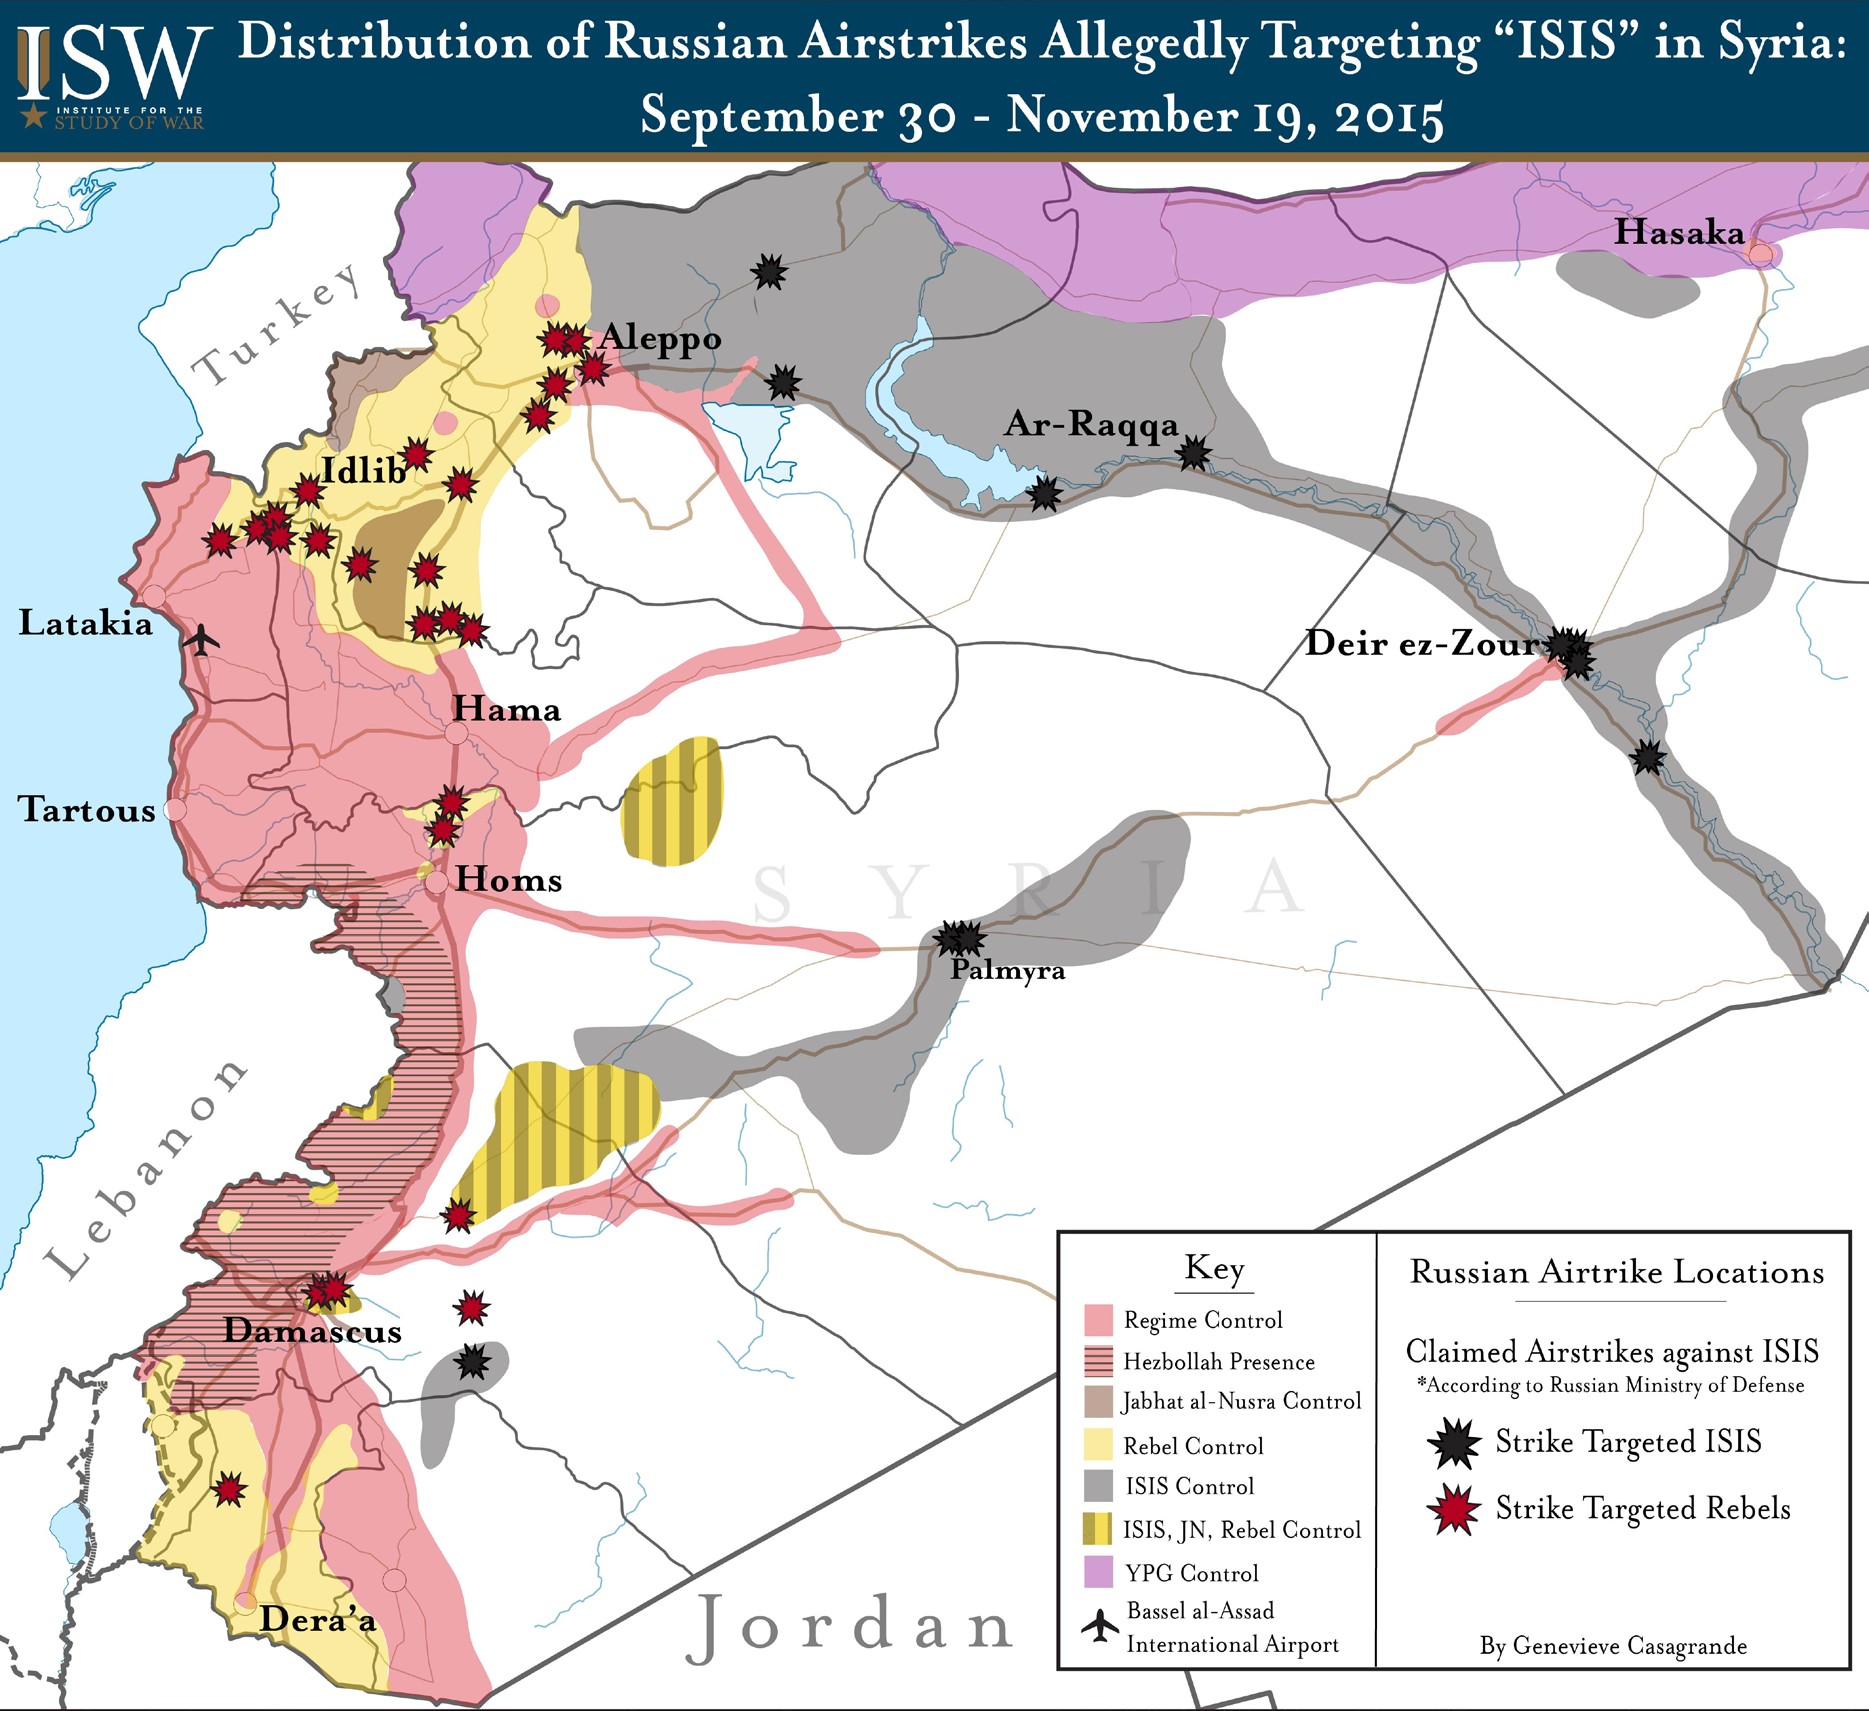 The Russian Ministry of Defense (MoD) regularly releases disinformation in order to portray itself as an effective anti-ISIS actor in Syria. The Russian MoD claimed to strike ISIS in 45 discrete locations across Syria from September 30 to November 19. Credible local reporting confirmed that airstrikes occurred in 36 of the reported locations, although ISW assessed that 25 of these airstrikes targeted Syrian rebel groups rather than ISIS. Source:Genevieve Casagrande, ISW